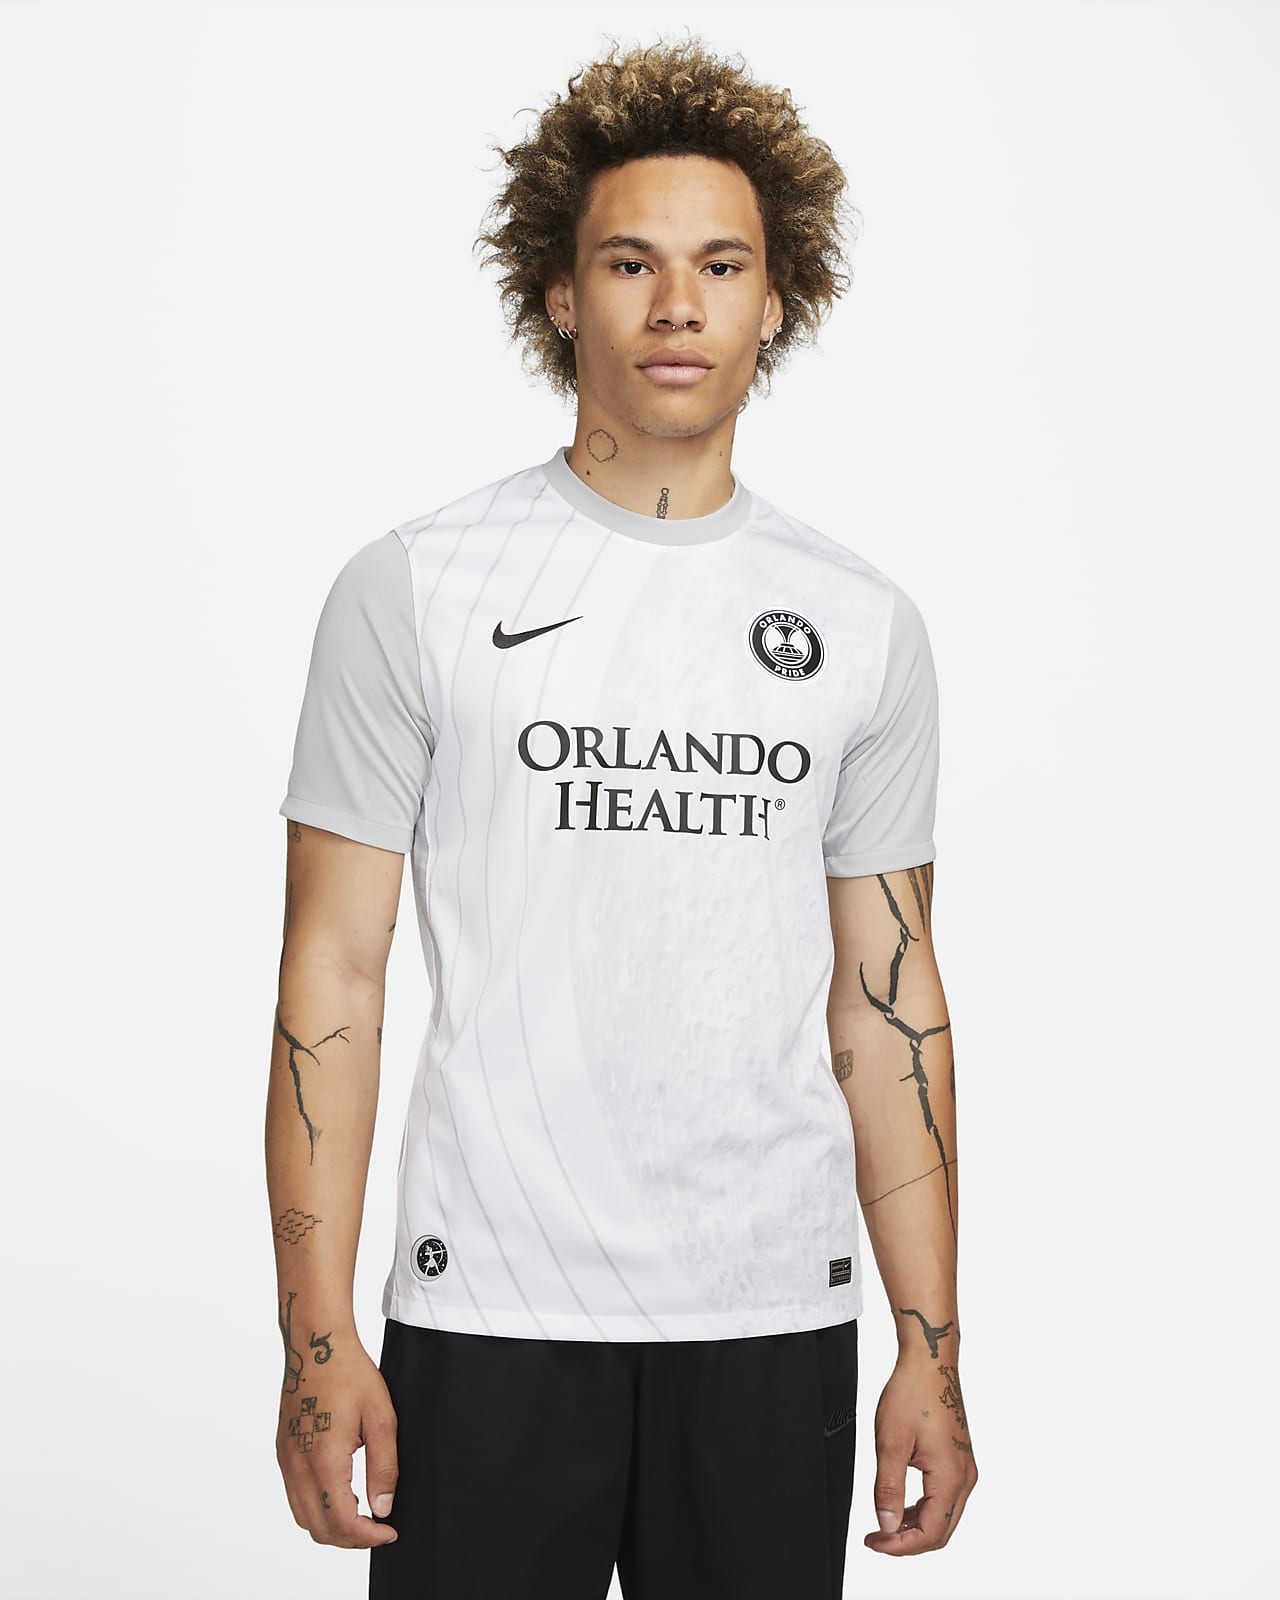 The white t-shirt Off White worn by Memphis Depay on his account